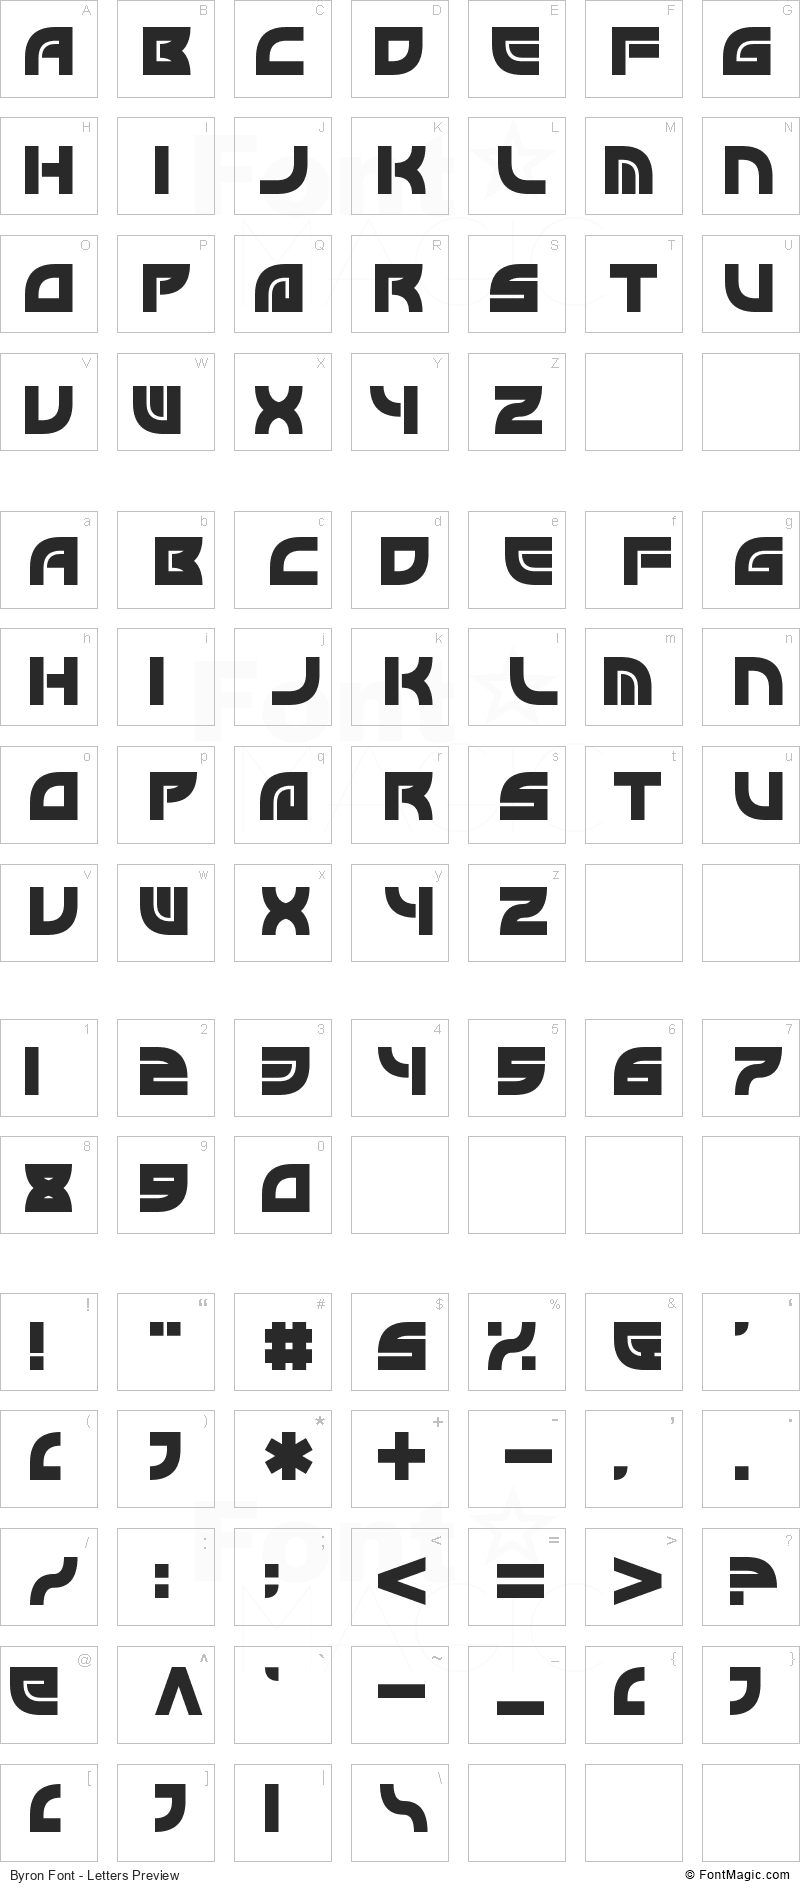 Byron Font - All Latters Preview Chart